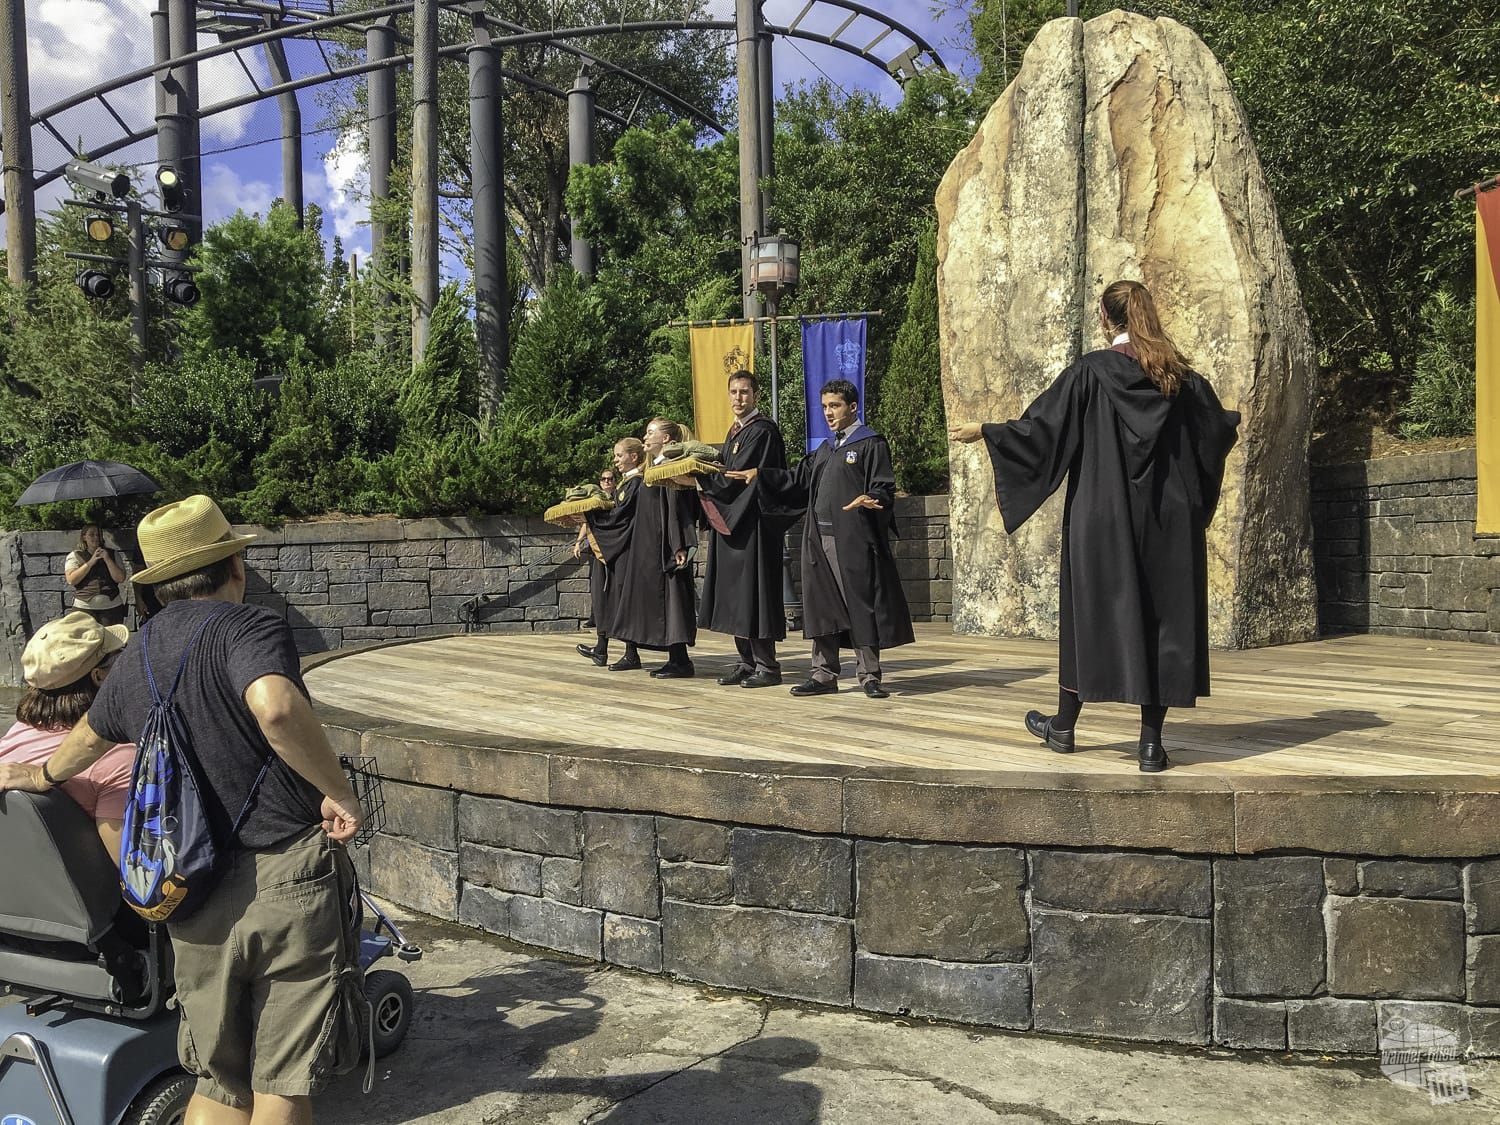 Both Hogsmeade and Diagon Alley feature stages for Harry Potter-related shows.